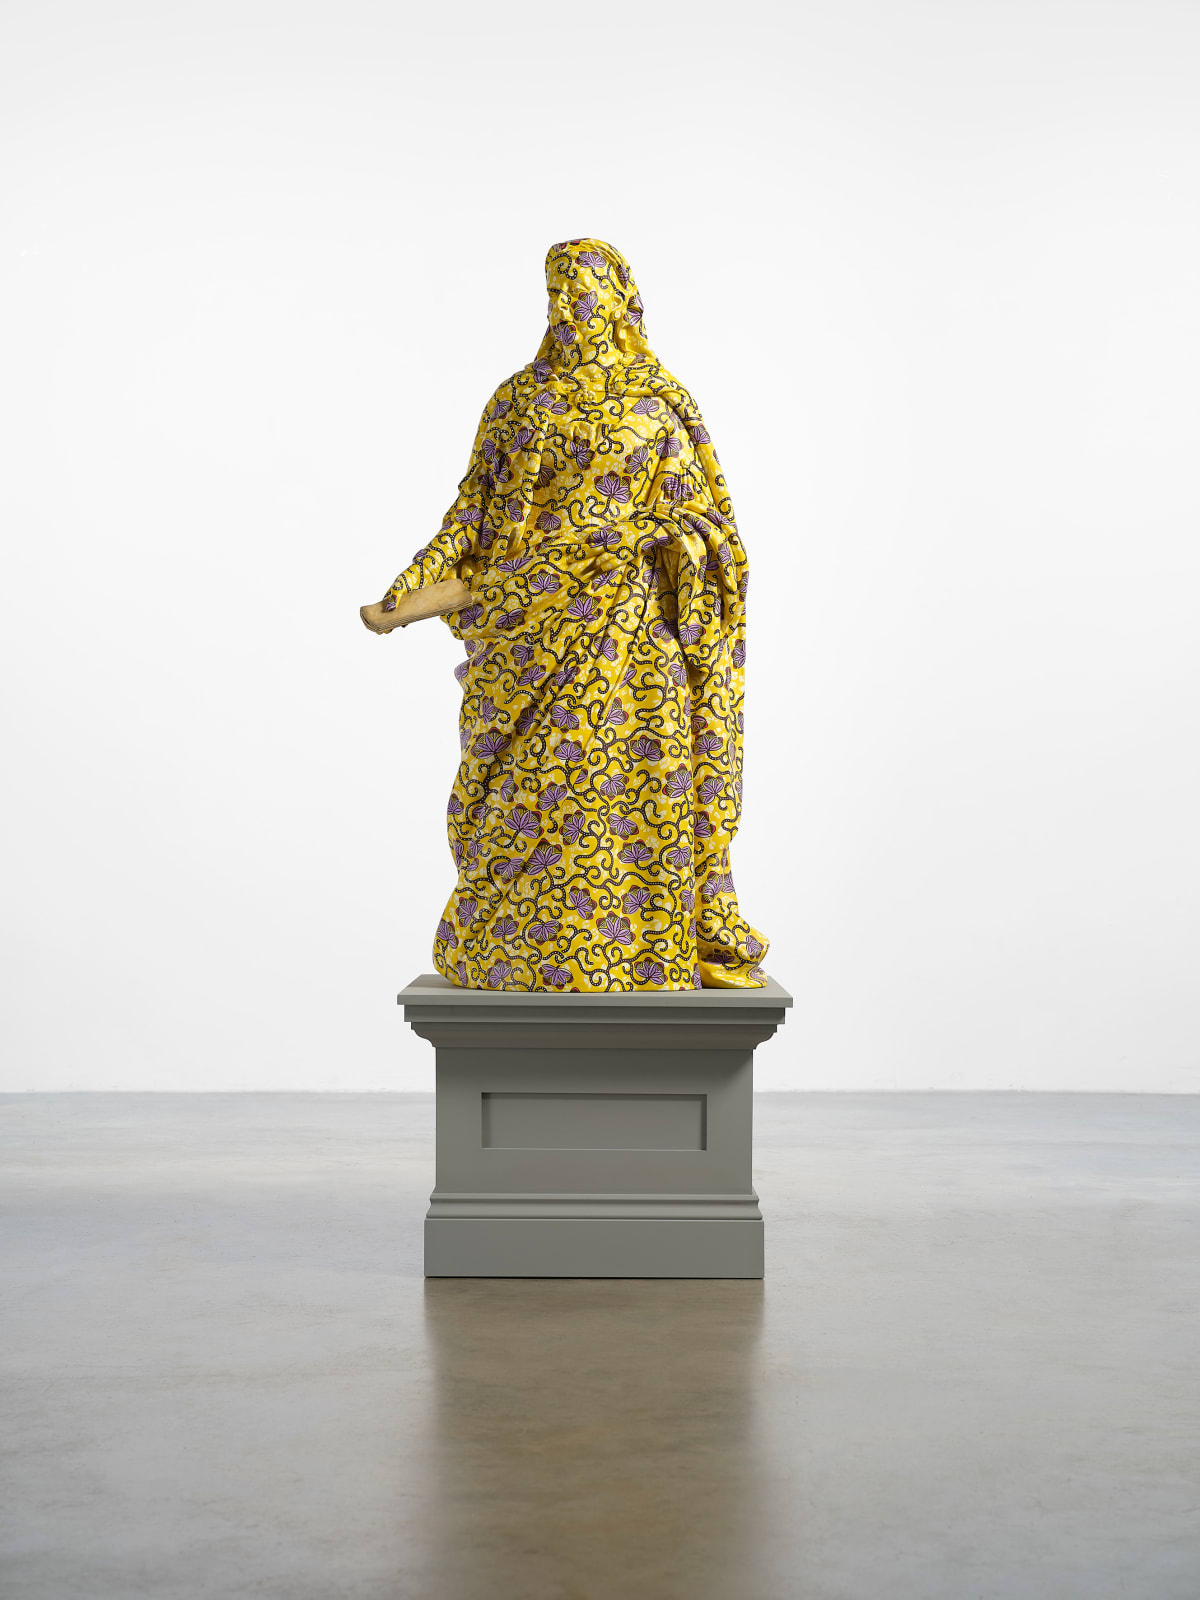 <div class="artist">Yinka Shonibare CBE RA</div><div class="title_and_year"><span class="title">Decolonised Structures (Queen Victoria)</span><span class="year">, 2022</span></div>